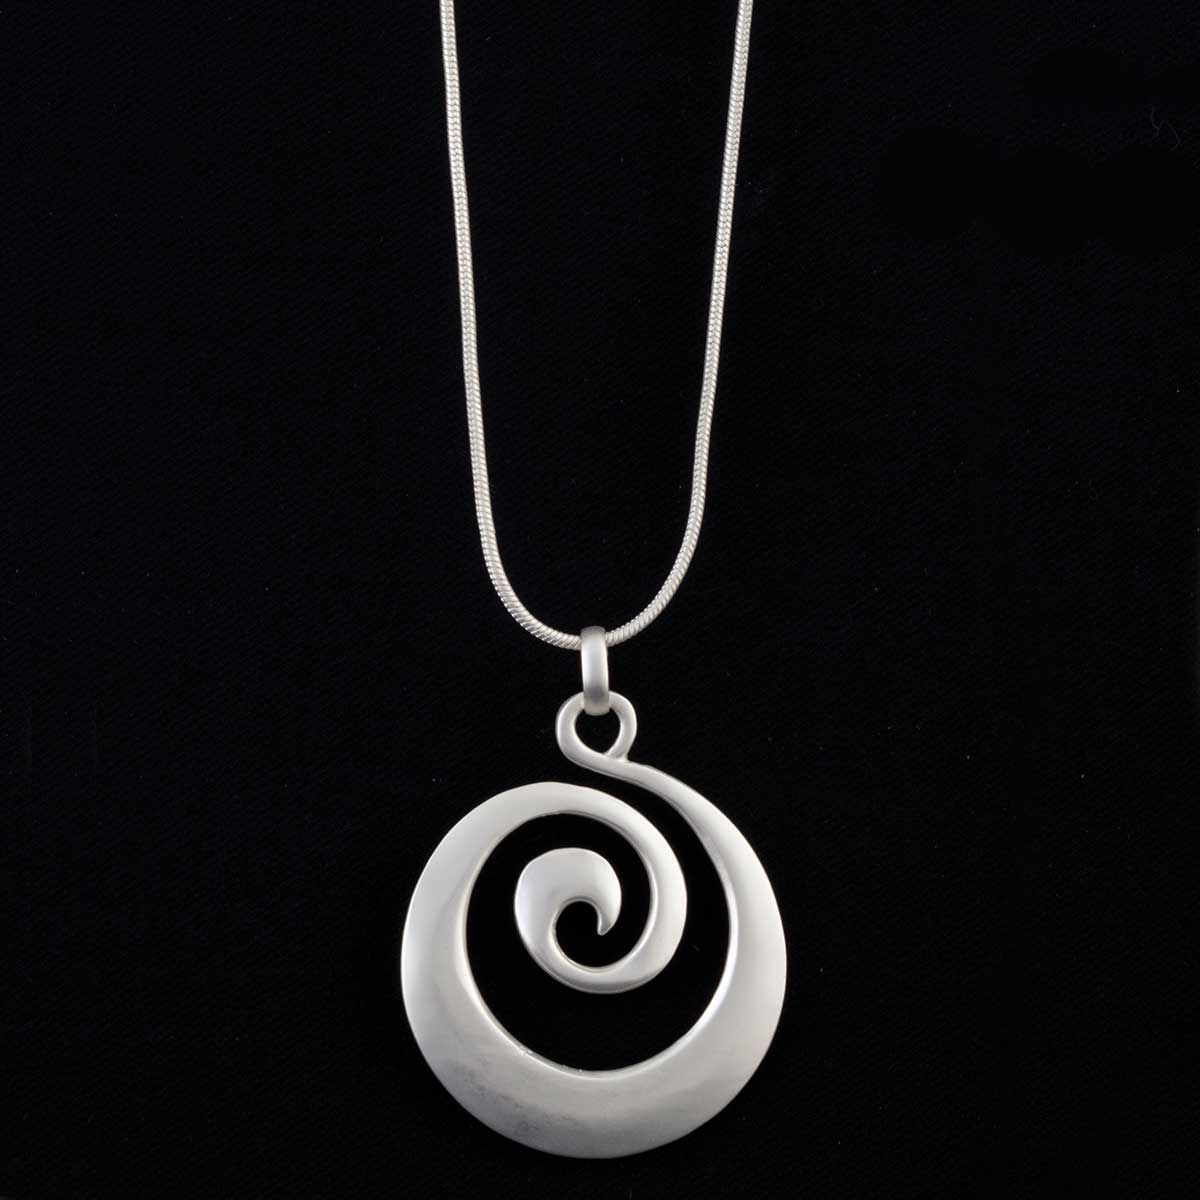 Satin Silver Swirl 1.5"X1.5" Circle Necklace on Chain 16"-19"